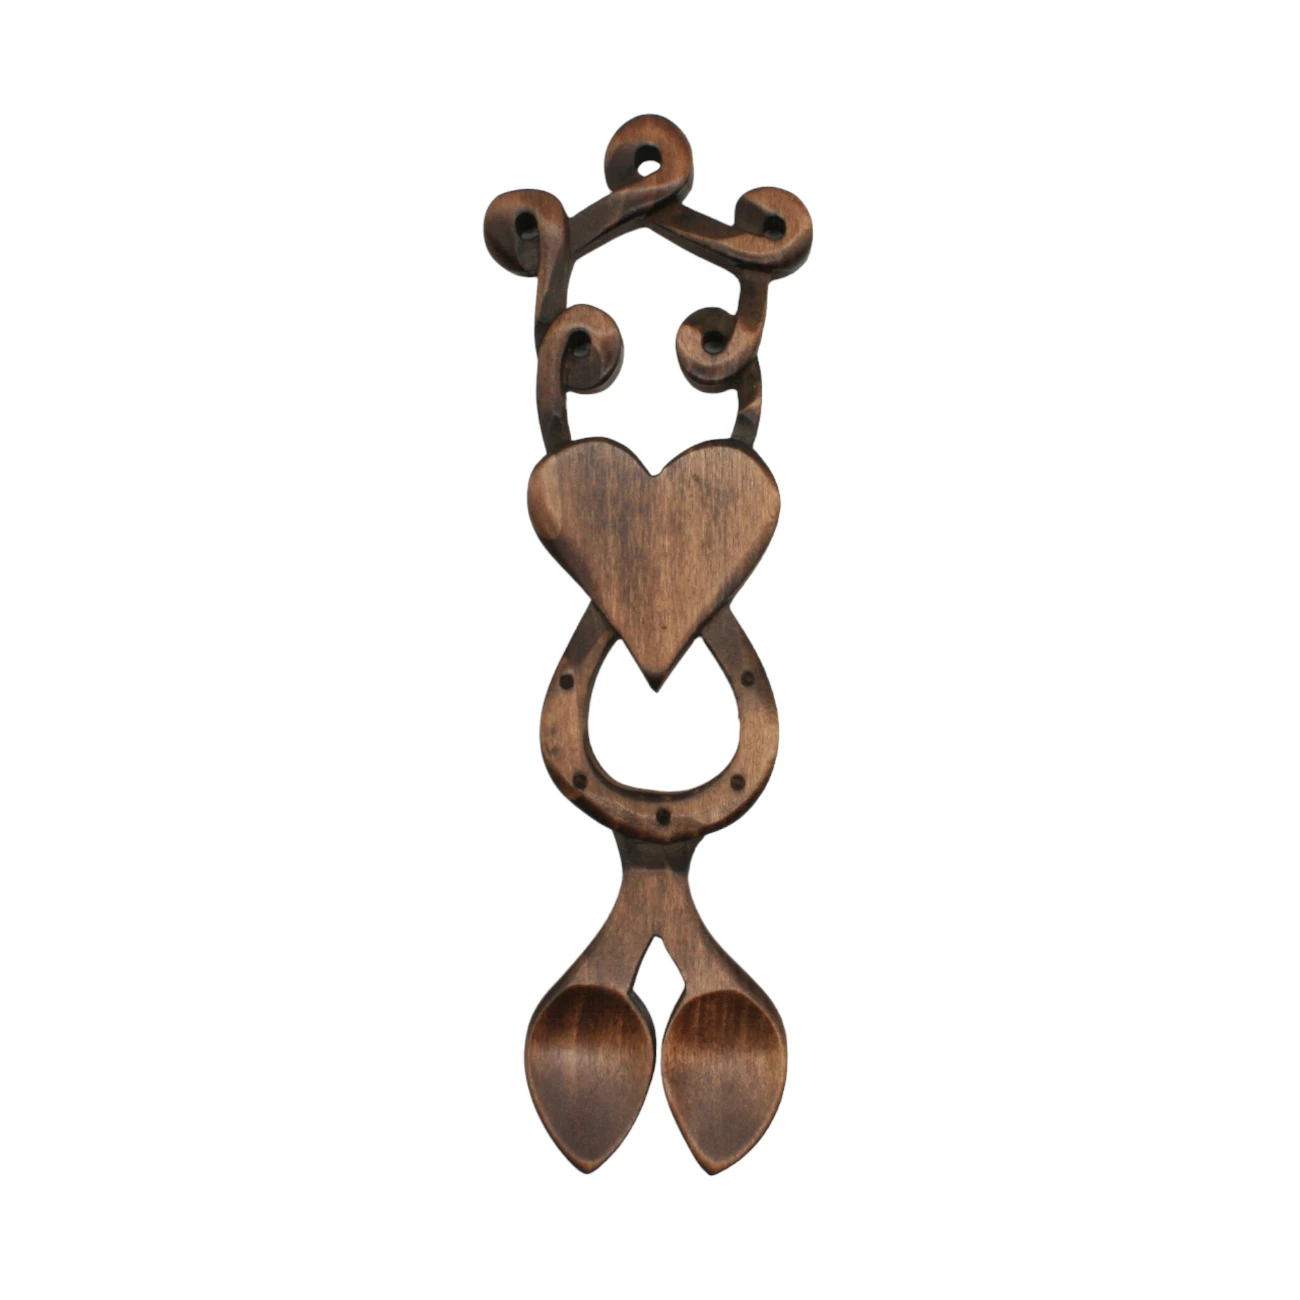 An image of a lovespoon titled Heart & Horseshoe